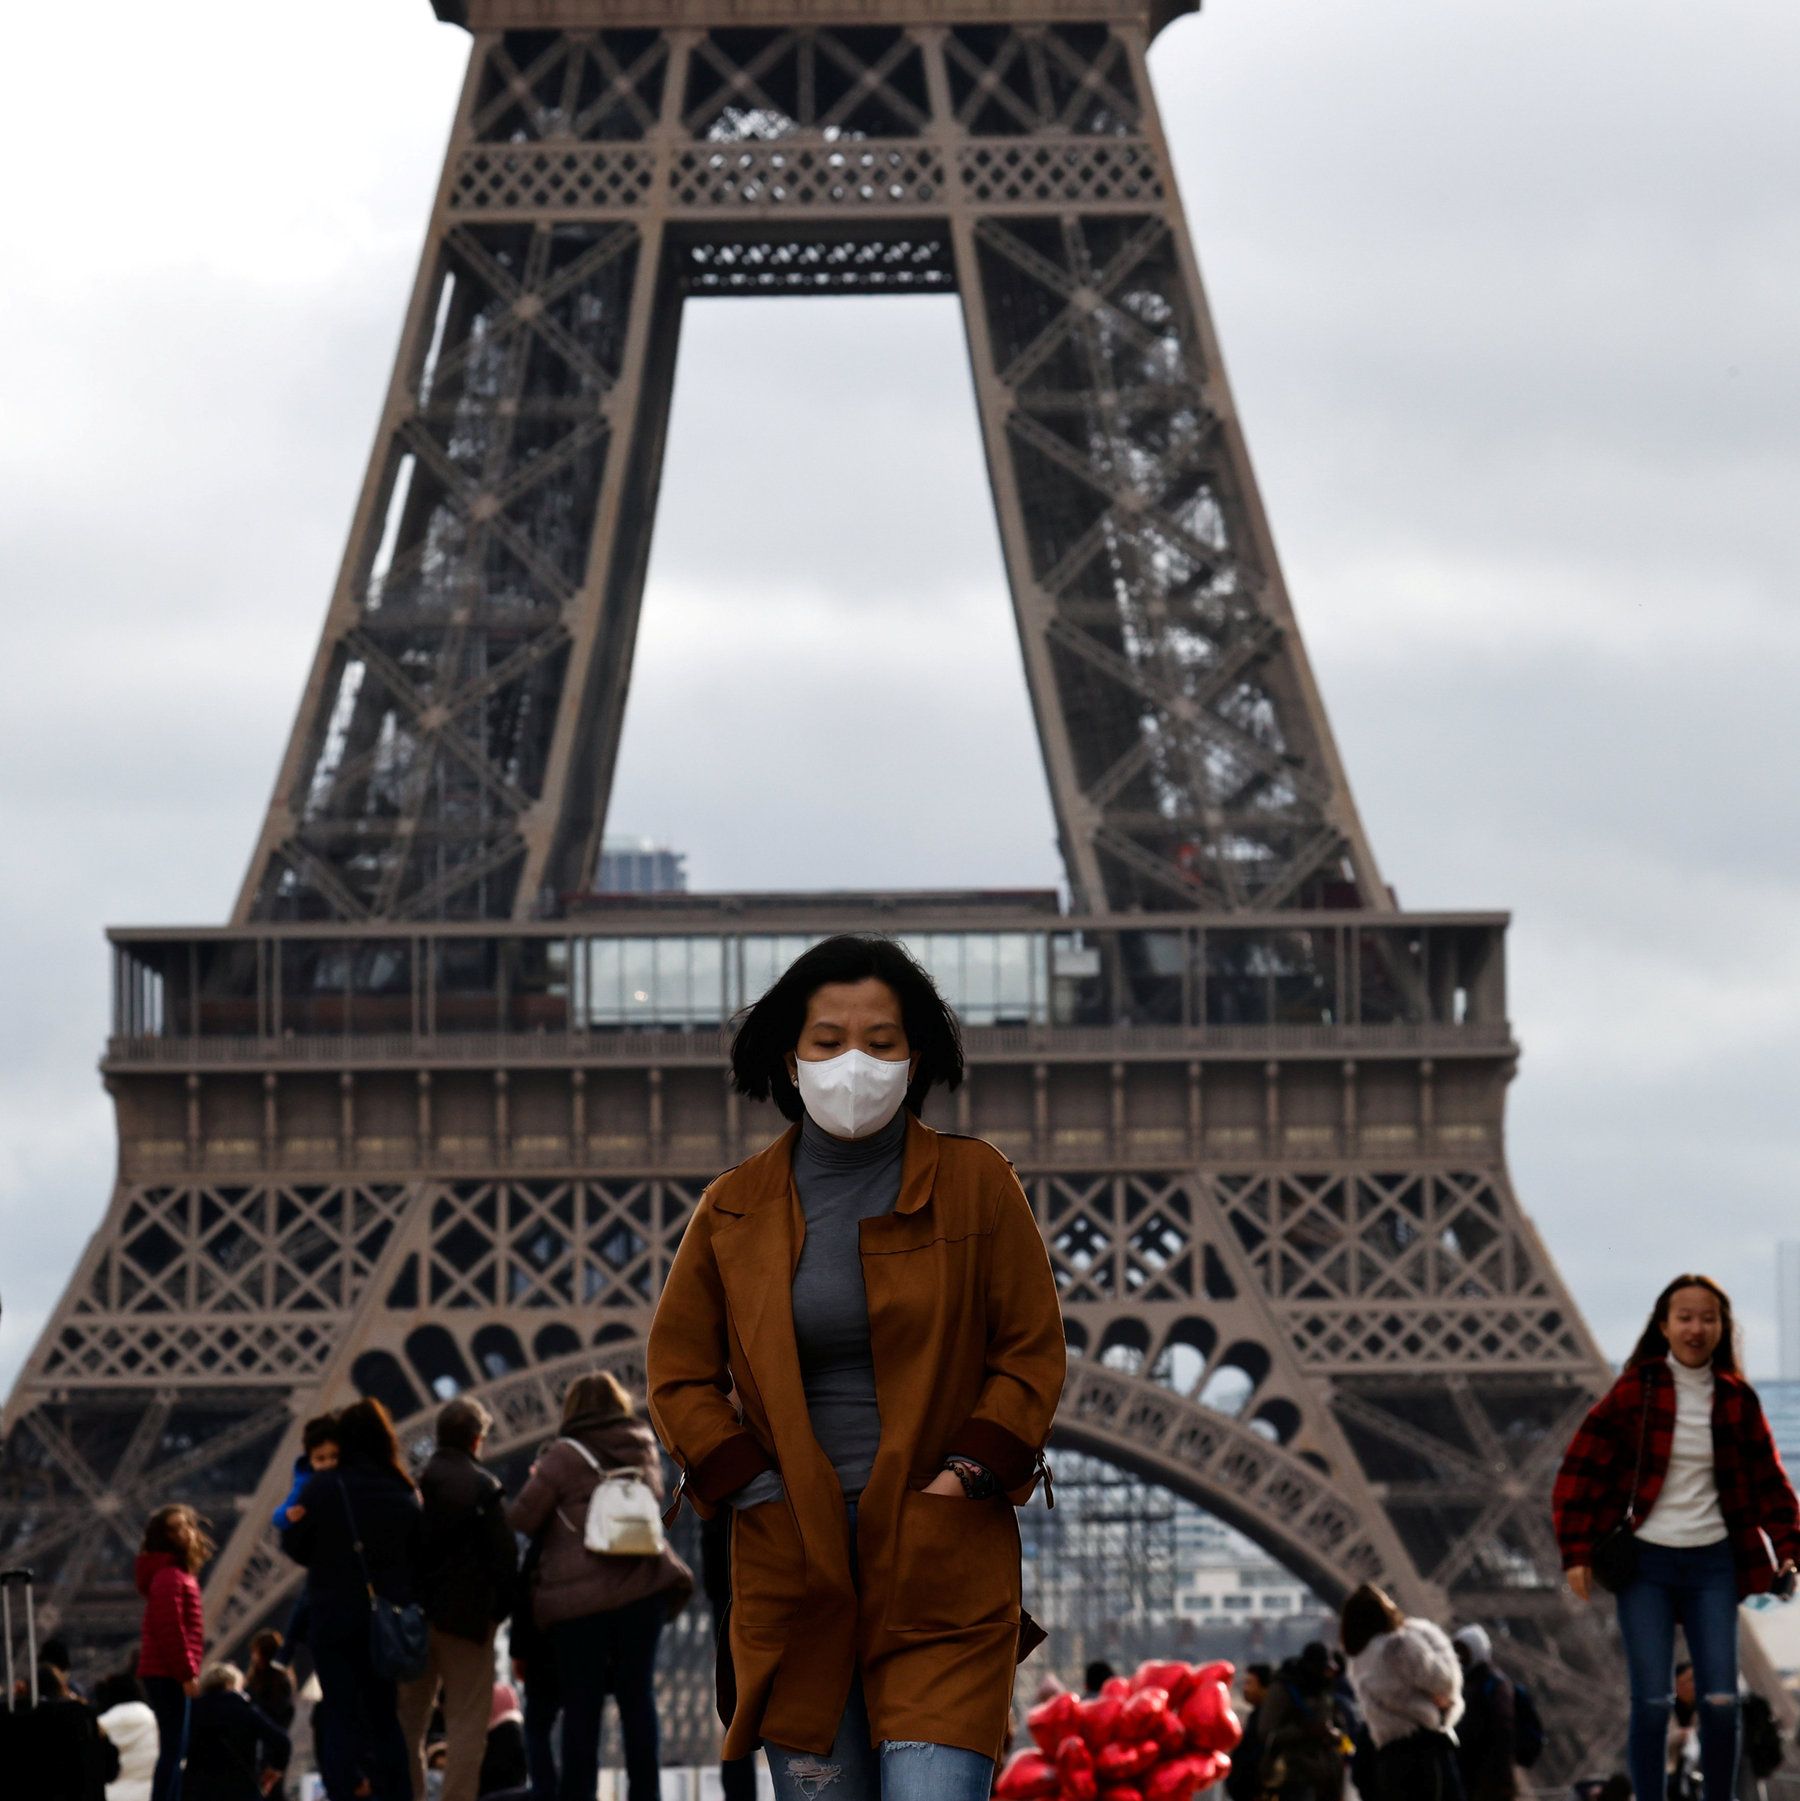 A woman wearing a mask in front of the Eifell Tower.